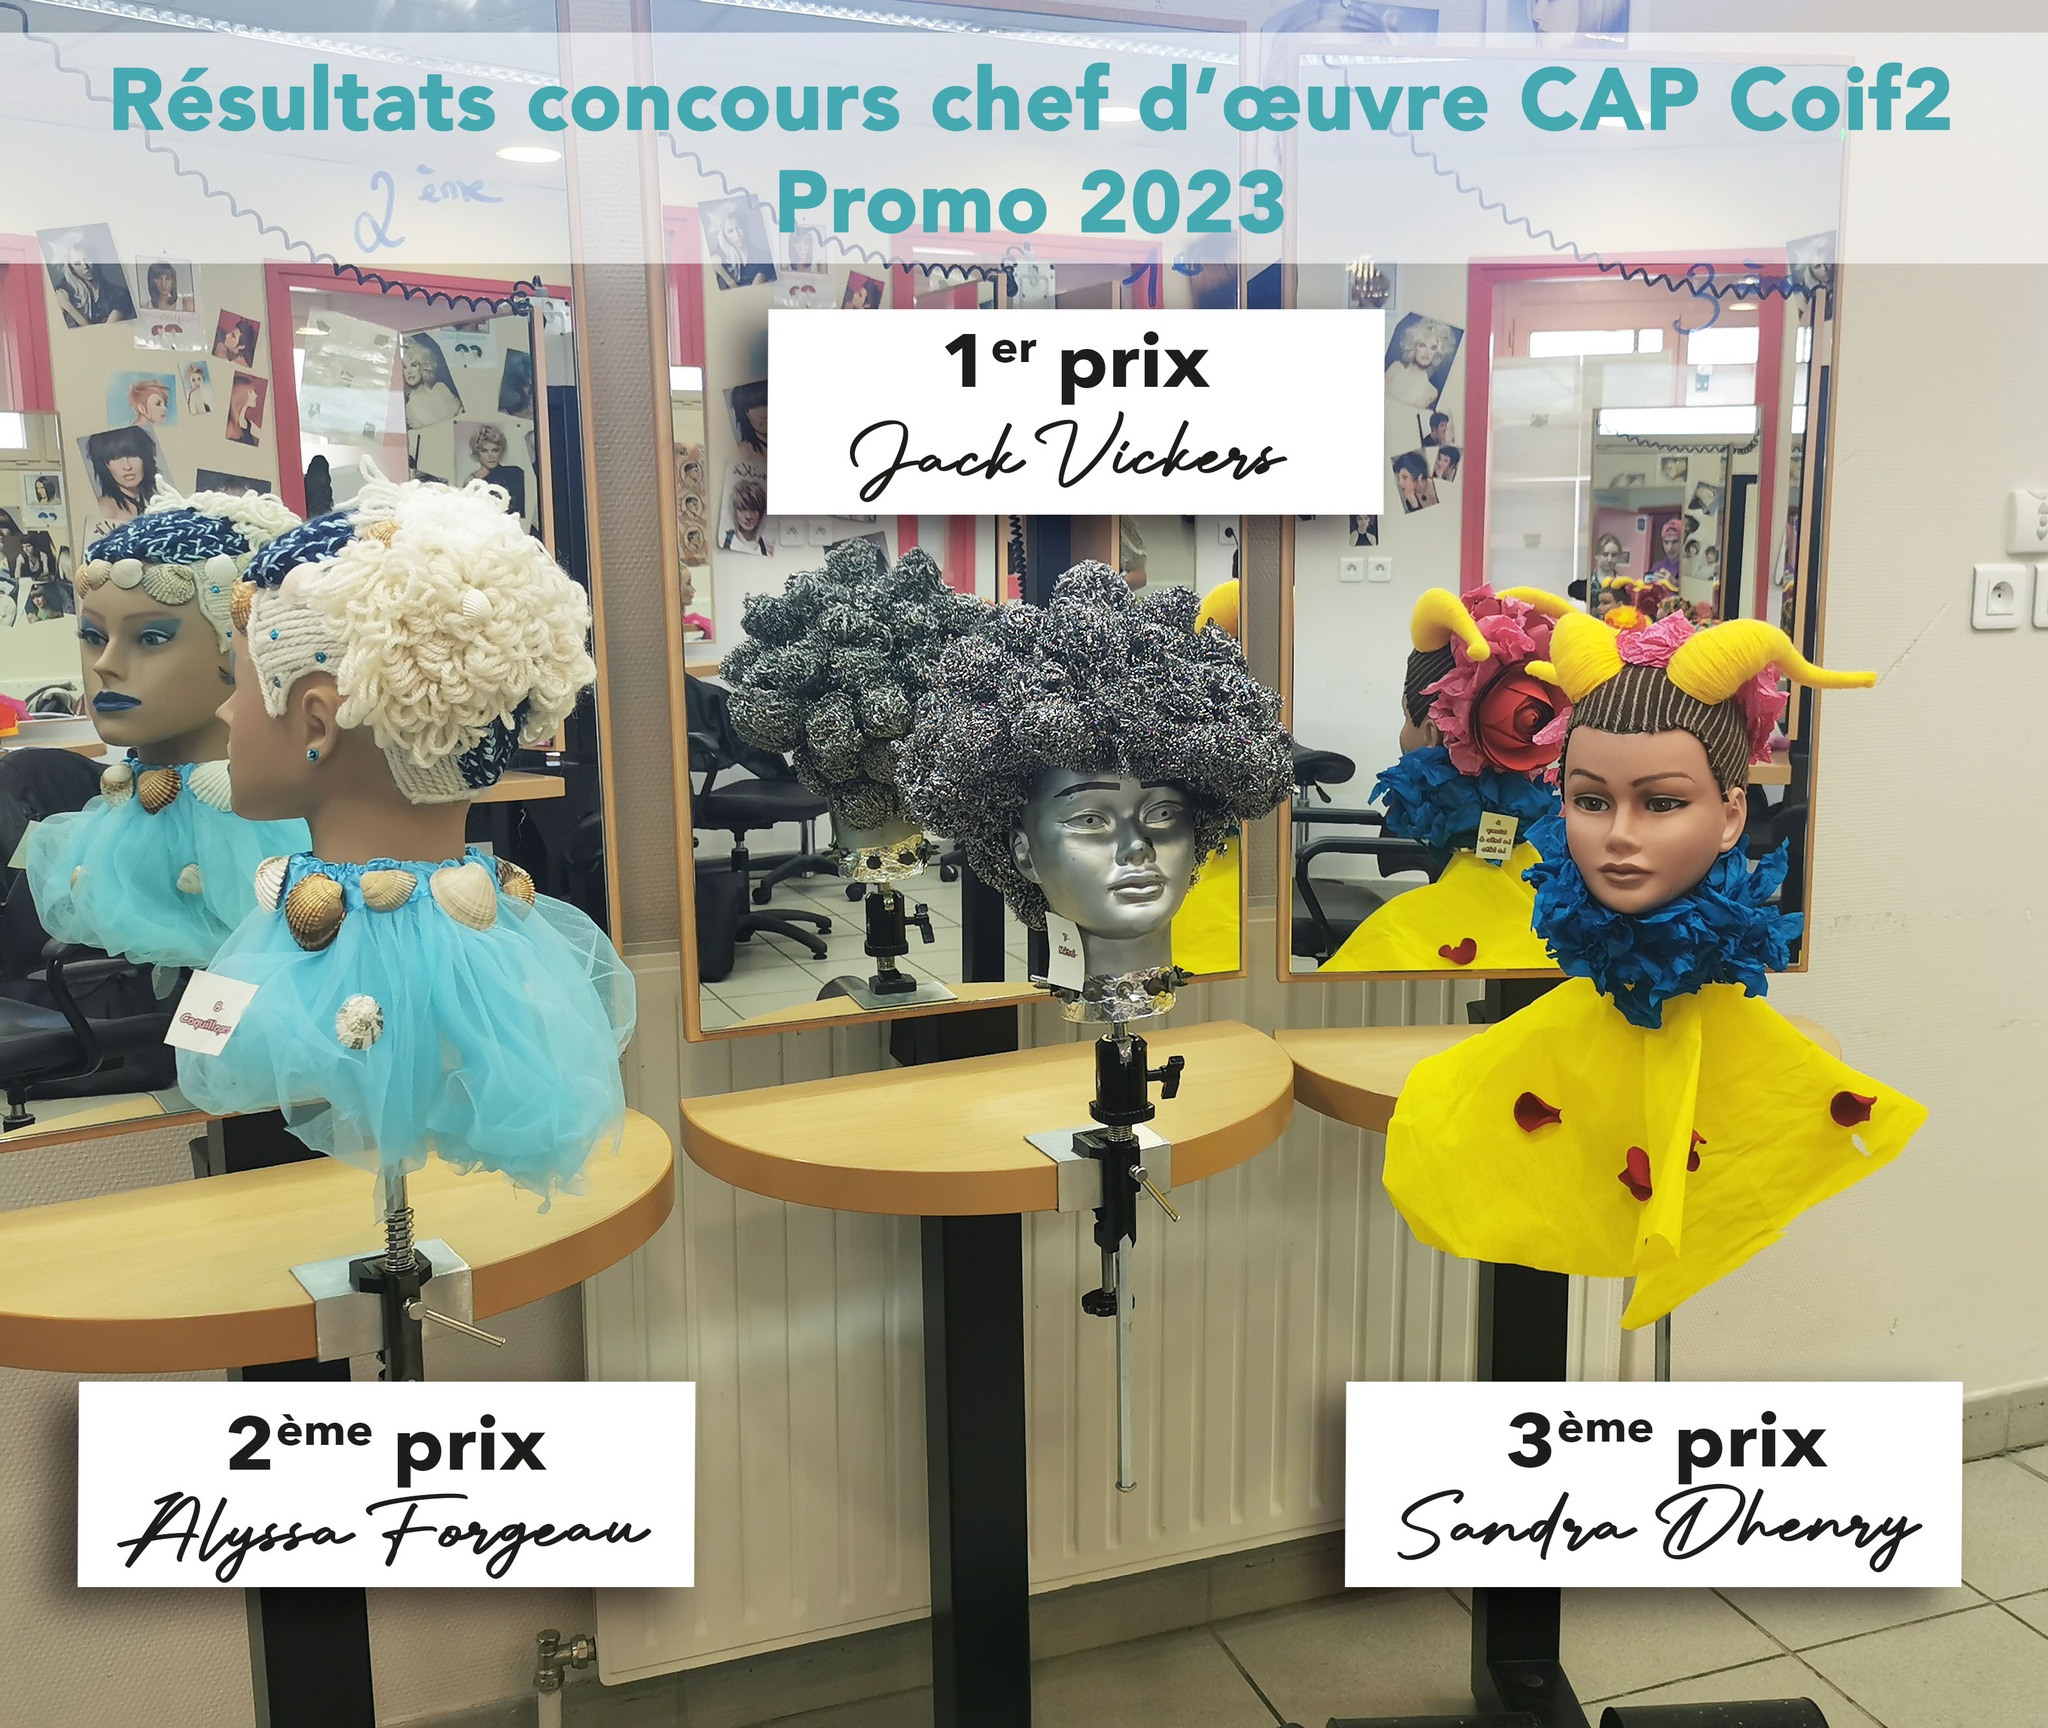 Chef d'oeuvre Coiffure 2023